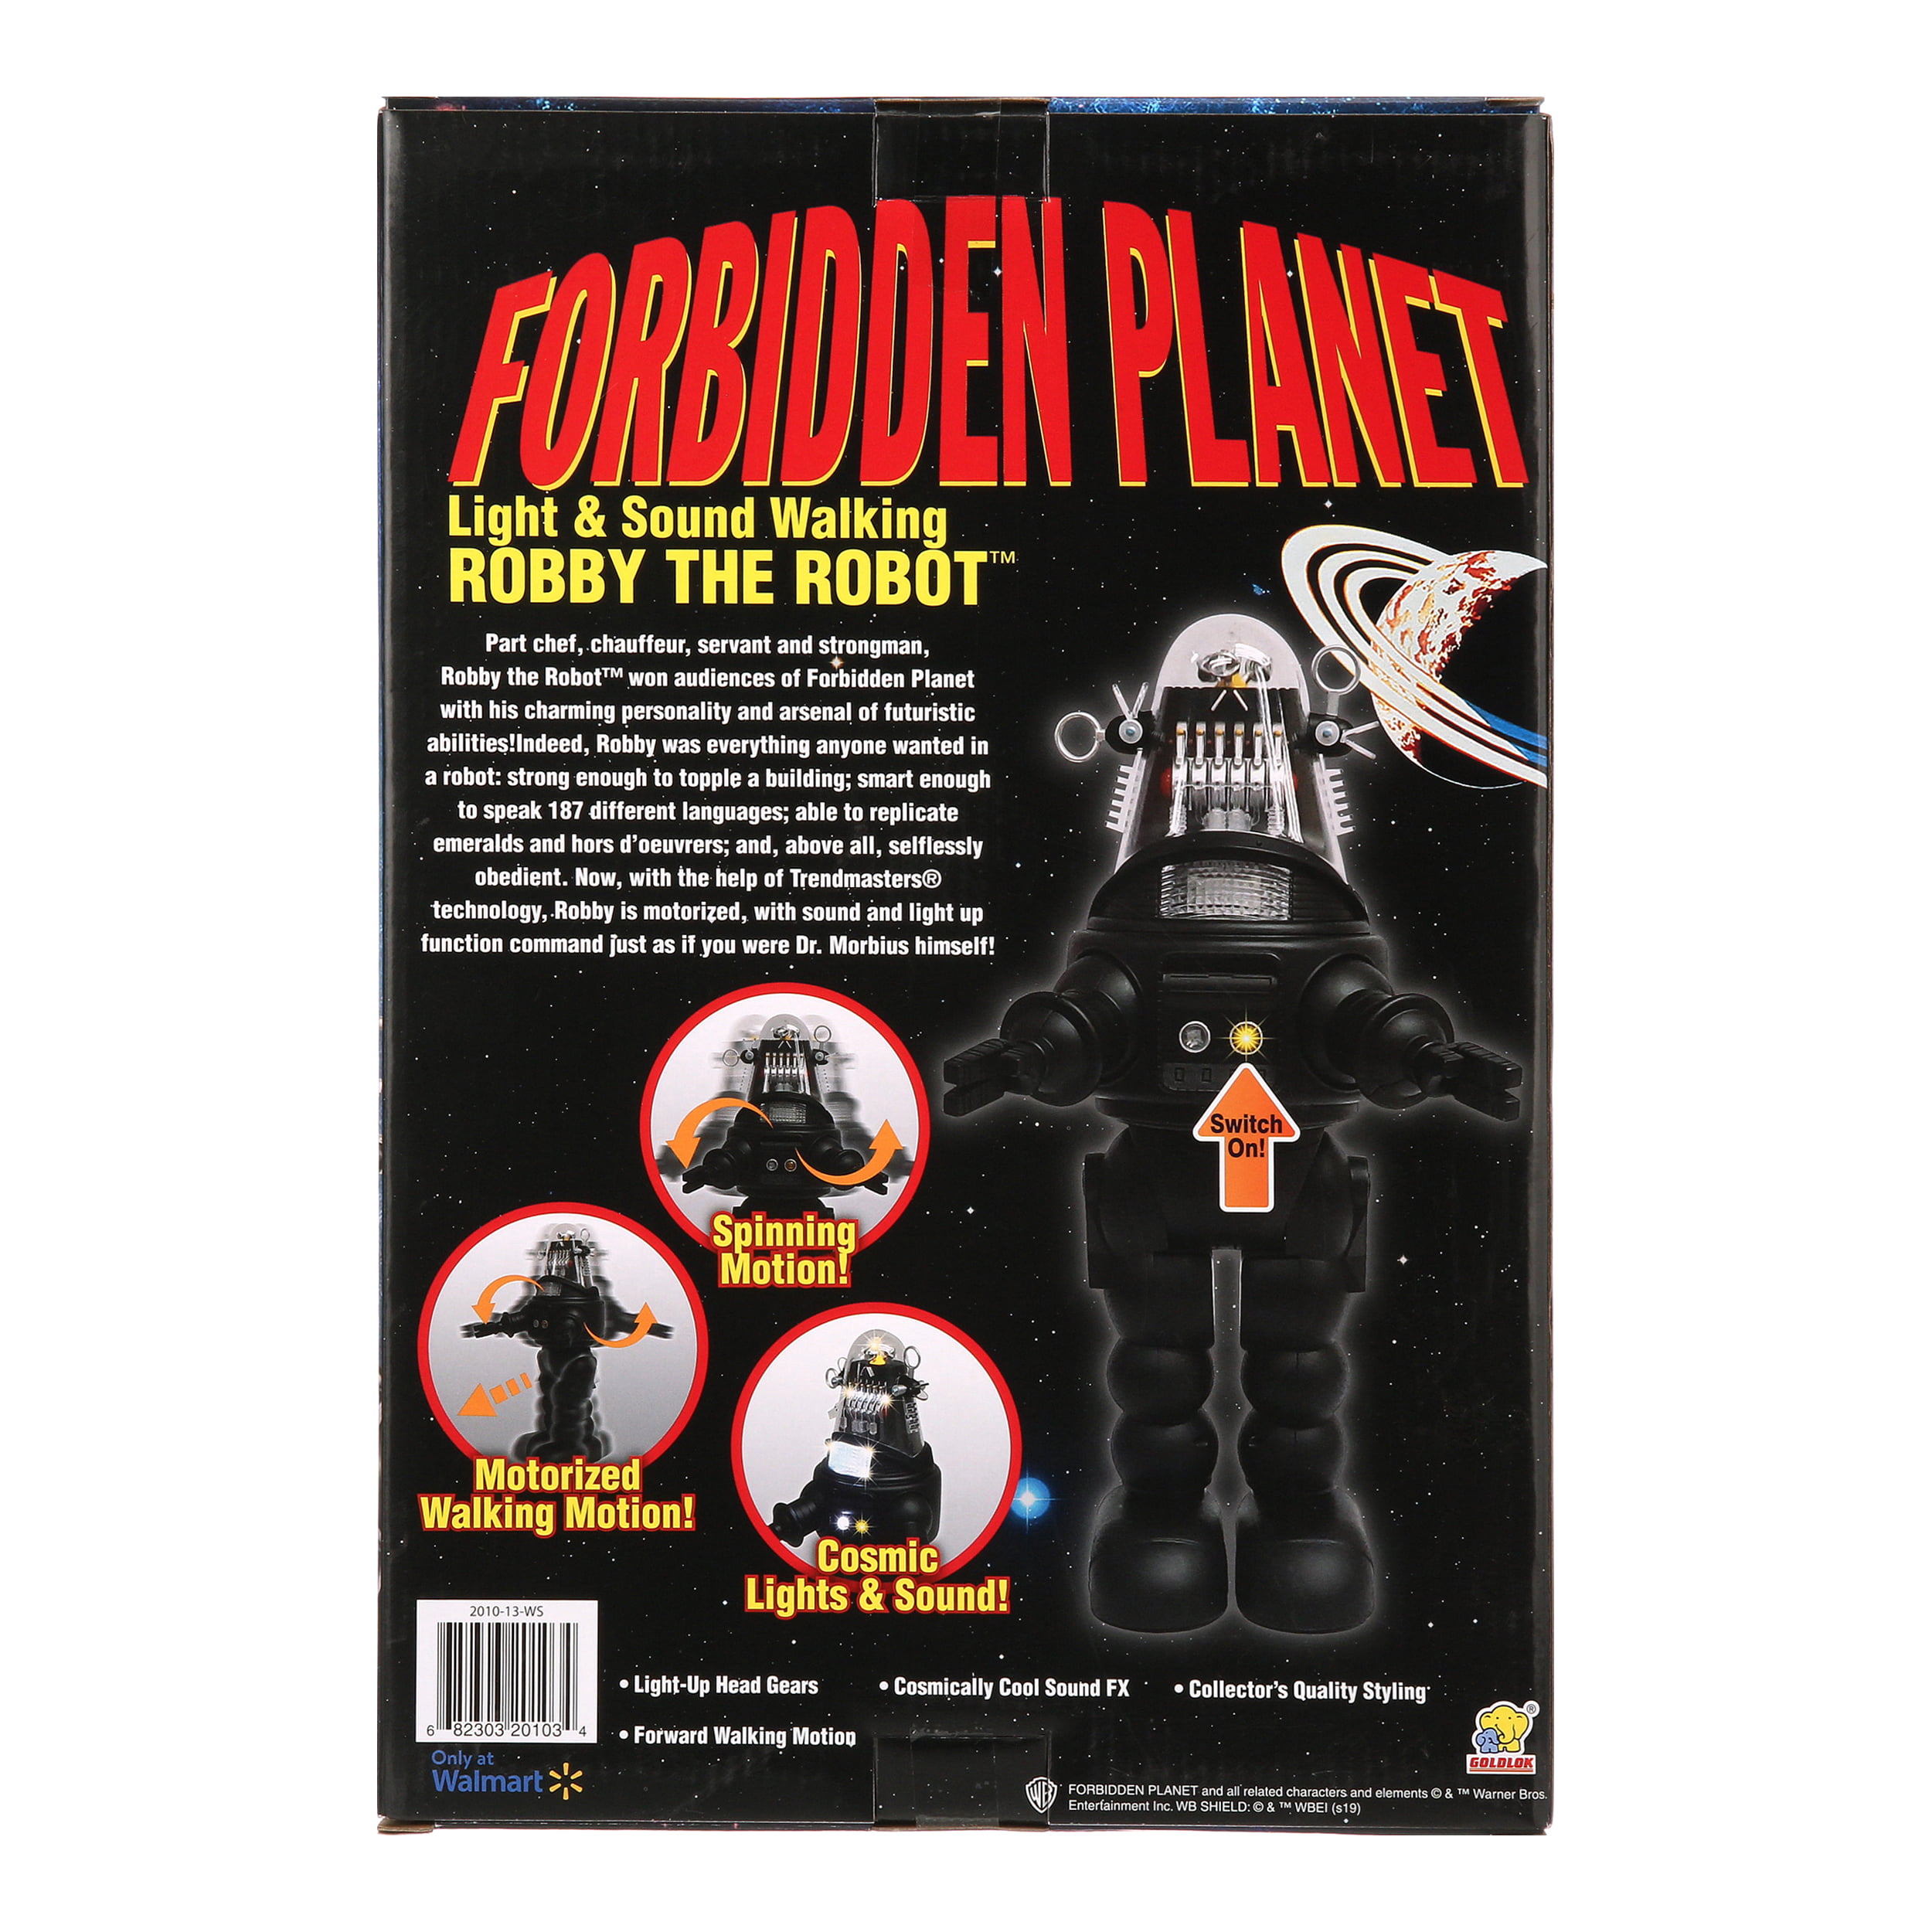 Forbidden Planet Robby The Robot Light & Sound Walking Toy 15" 